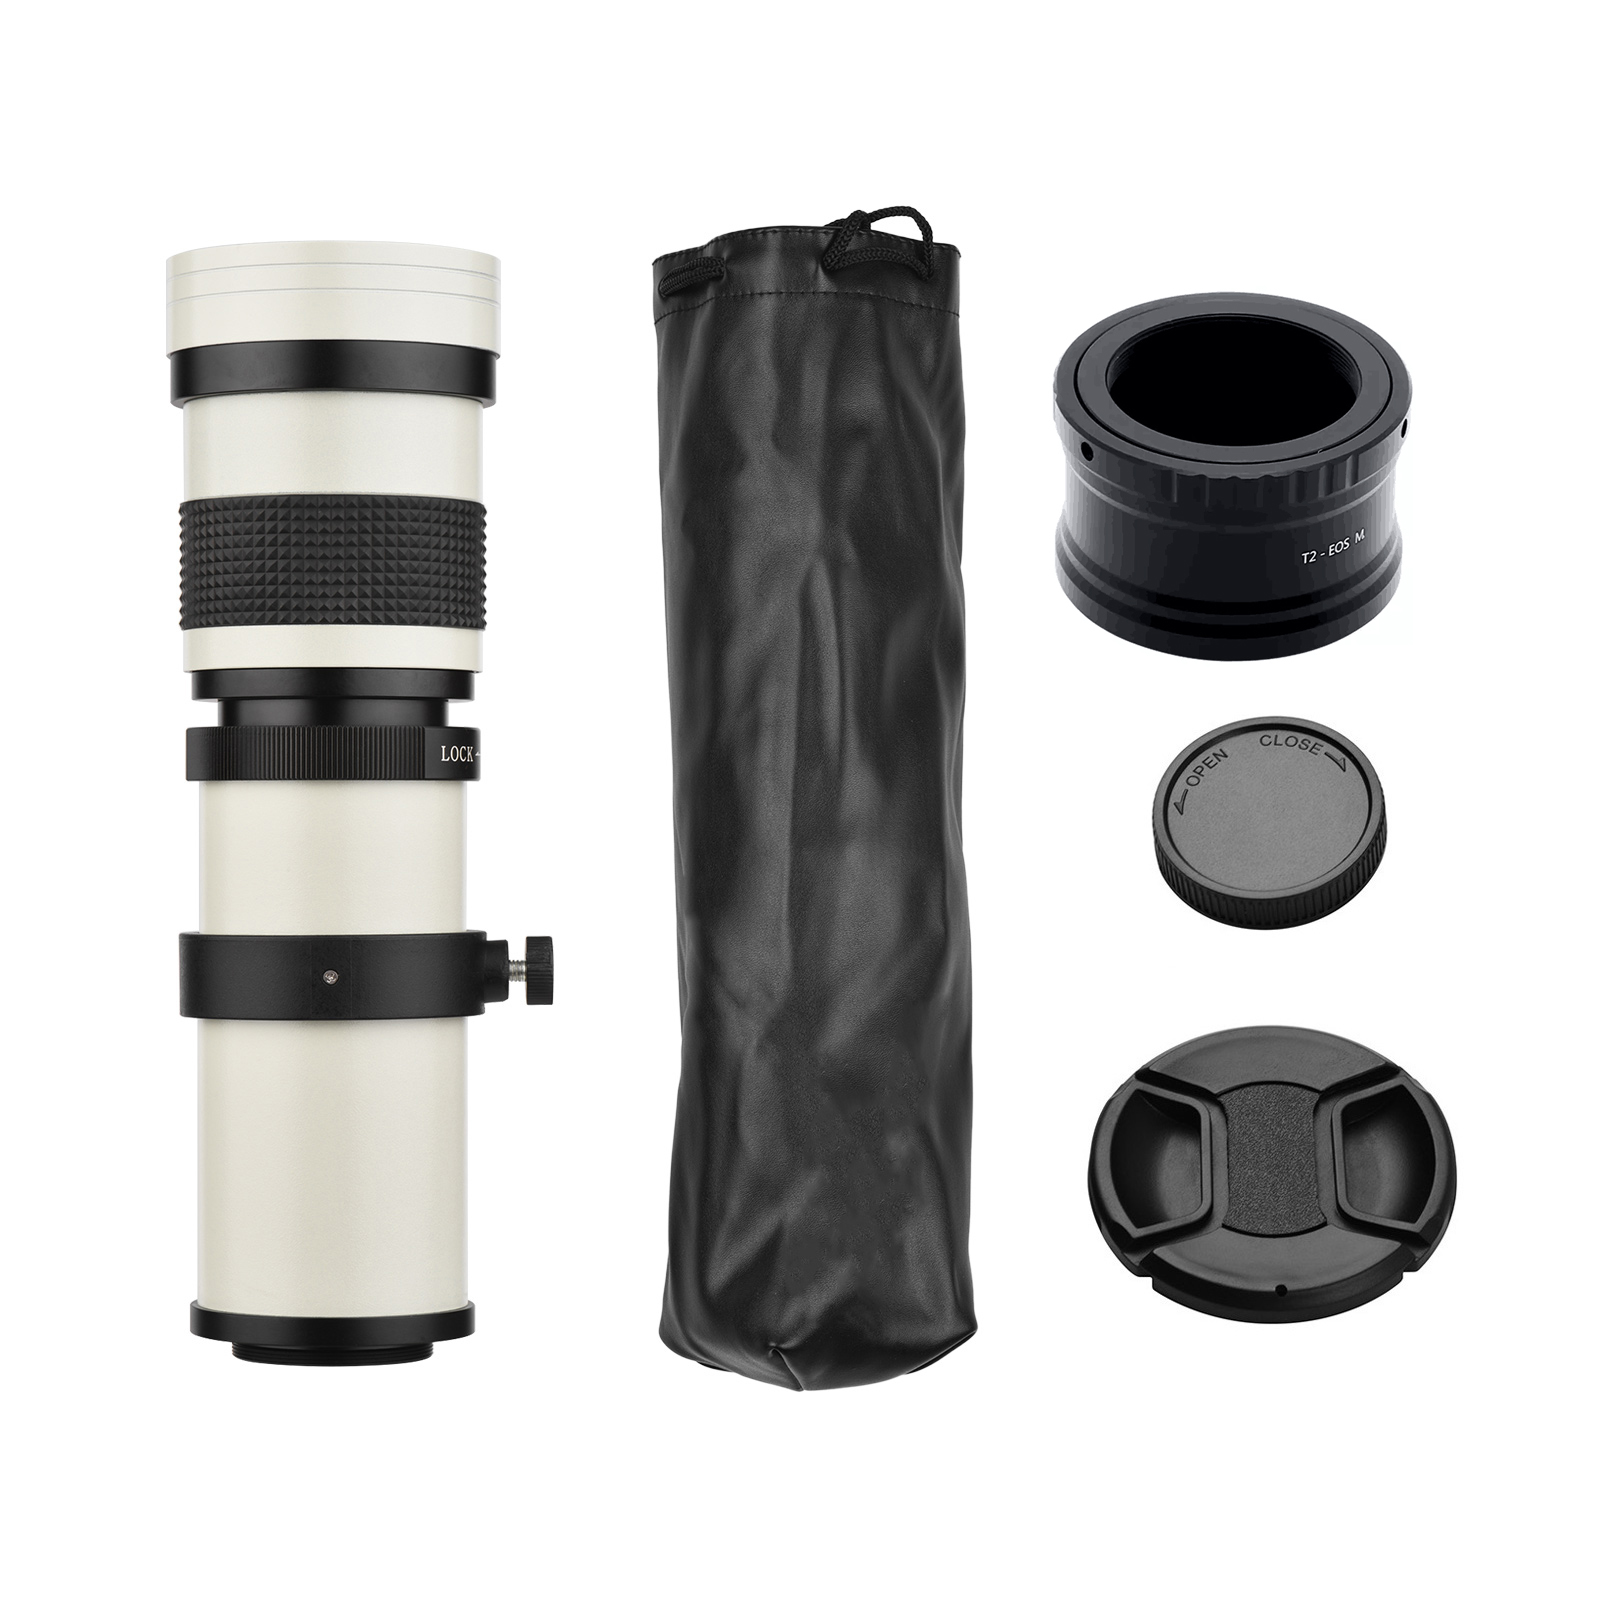 Walmeck  MF Super Telephoto Zoom Lens F8.3-16 420-800mm T2 Mount with M-mount Adapter Ring 14 Thread Replacement for  M M2  M5 M6 Mark II  M50 M100 M200 Cameras - image 2 of 7